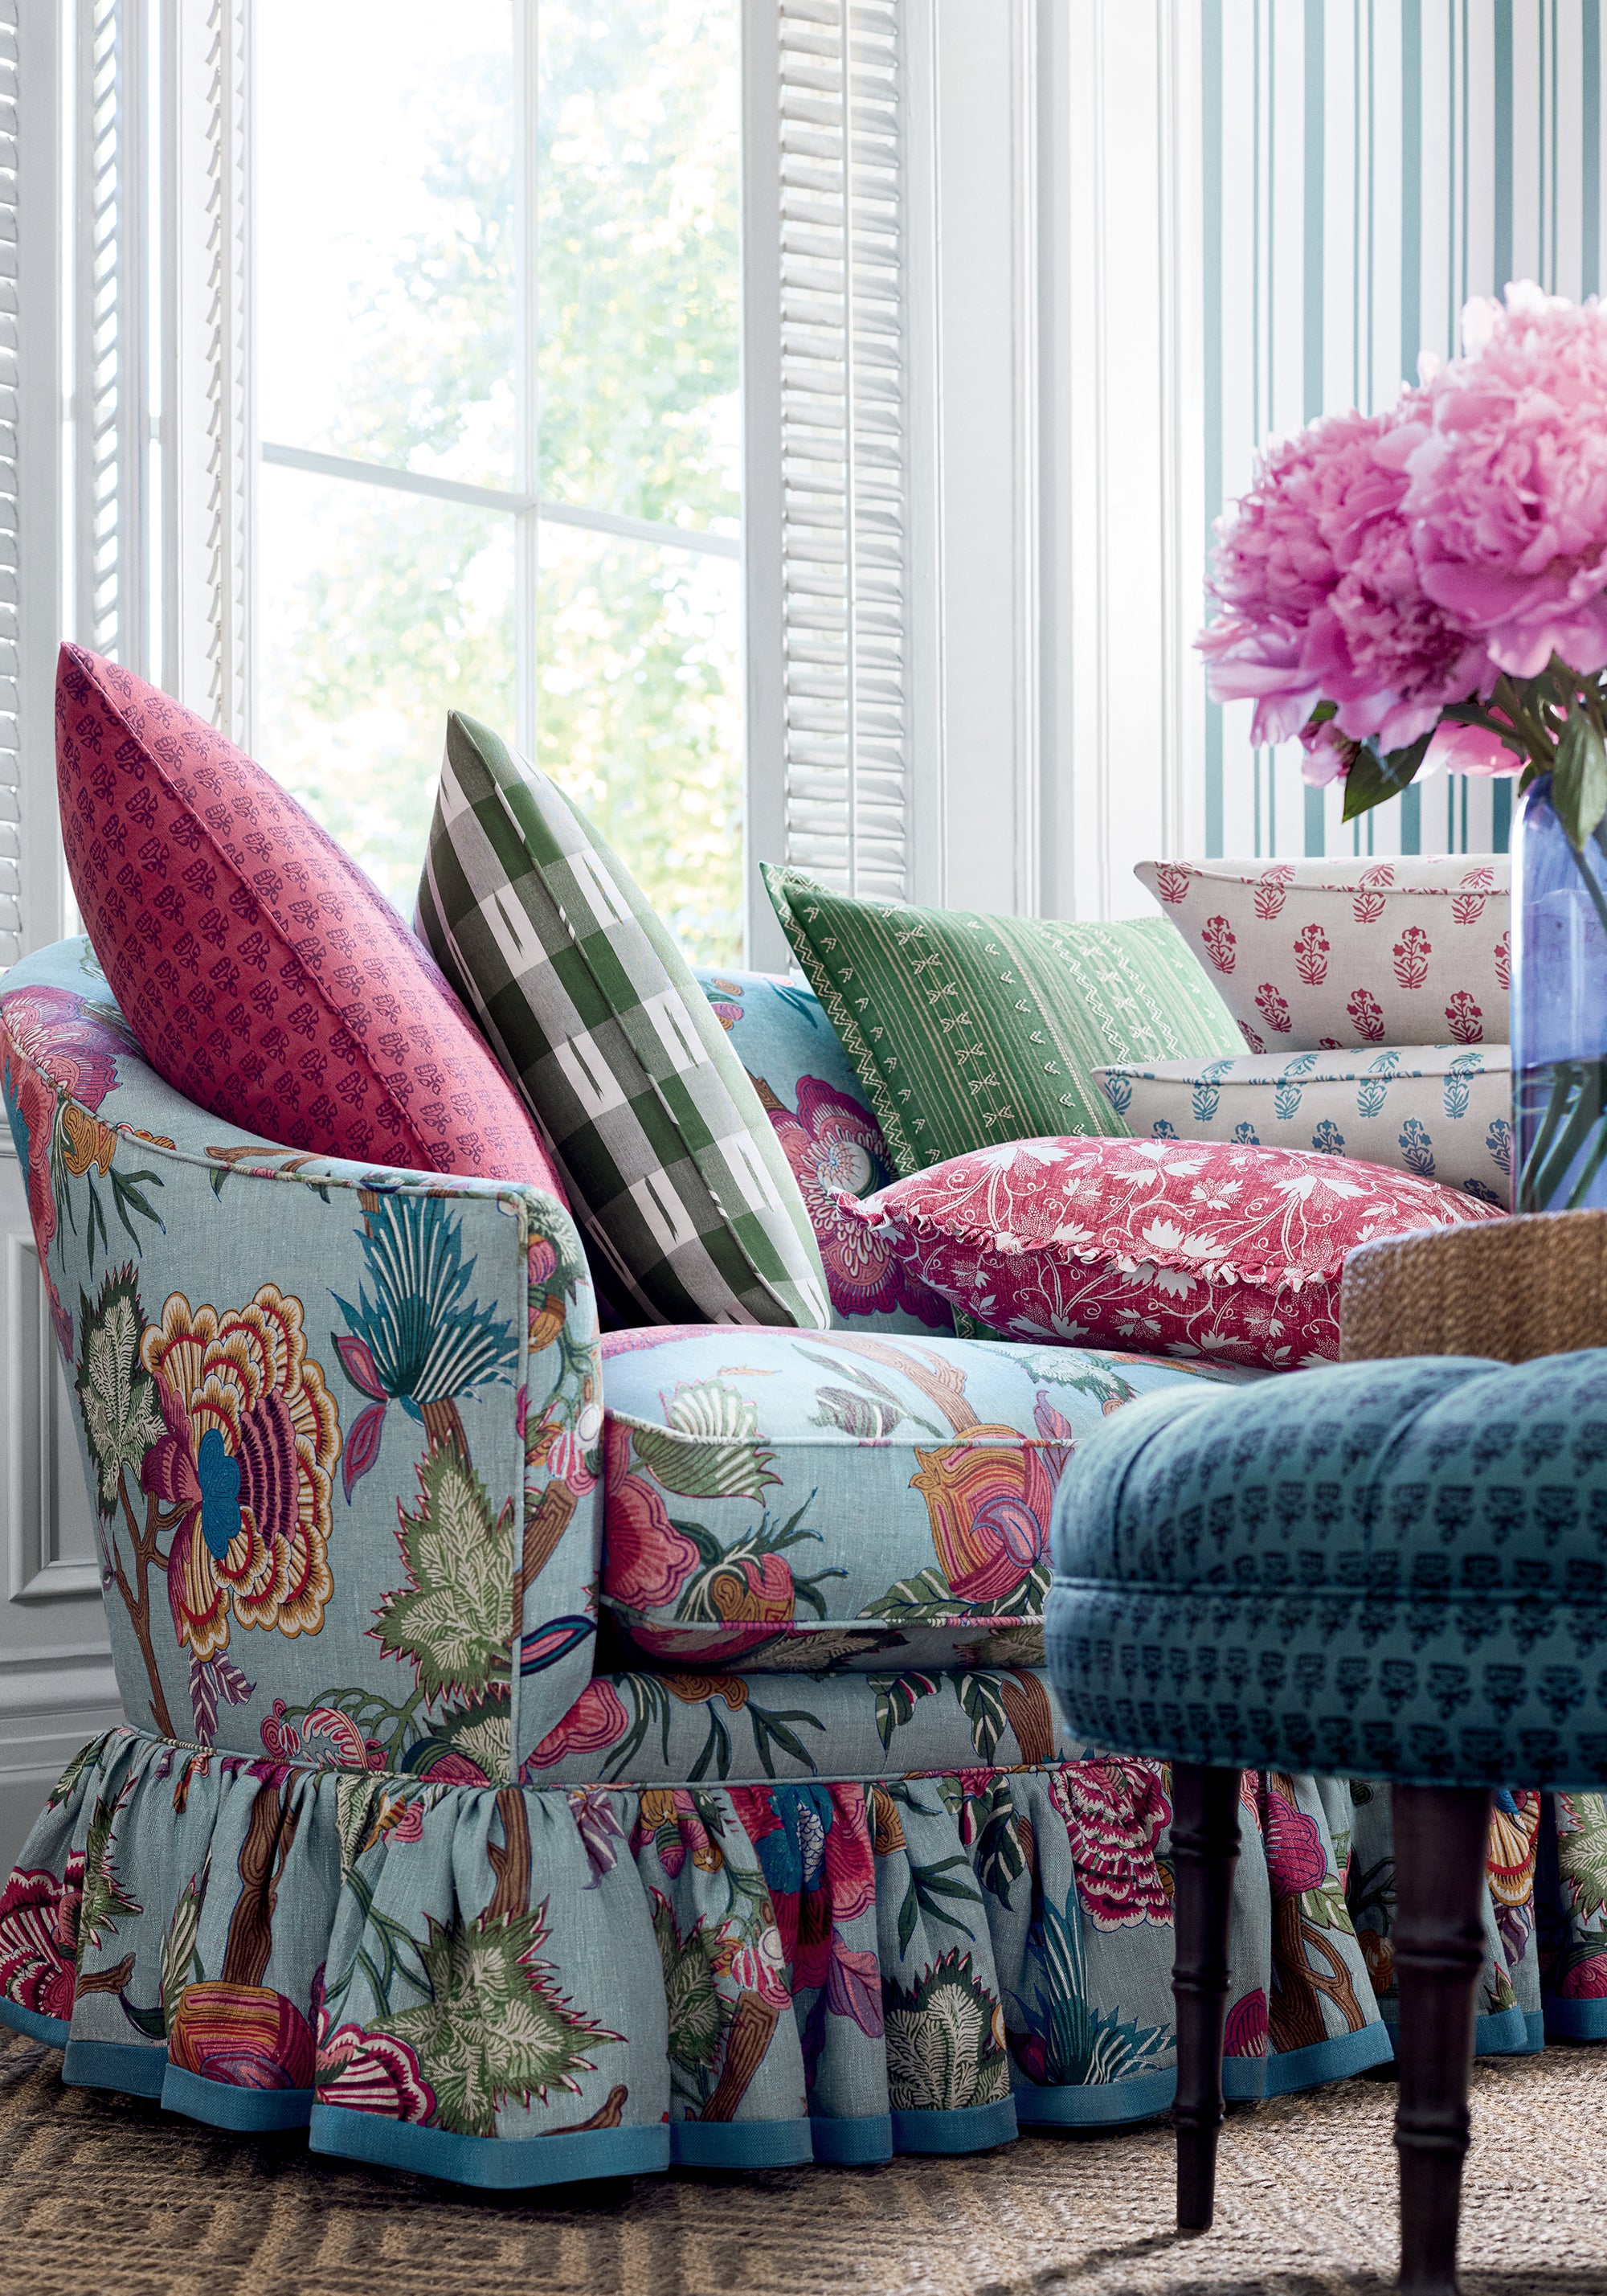 Sofa featuring Indienne Jacobean fabric in raspberry and teal color - pattern number F936415 - by Thibaut in the Indienne collection